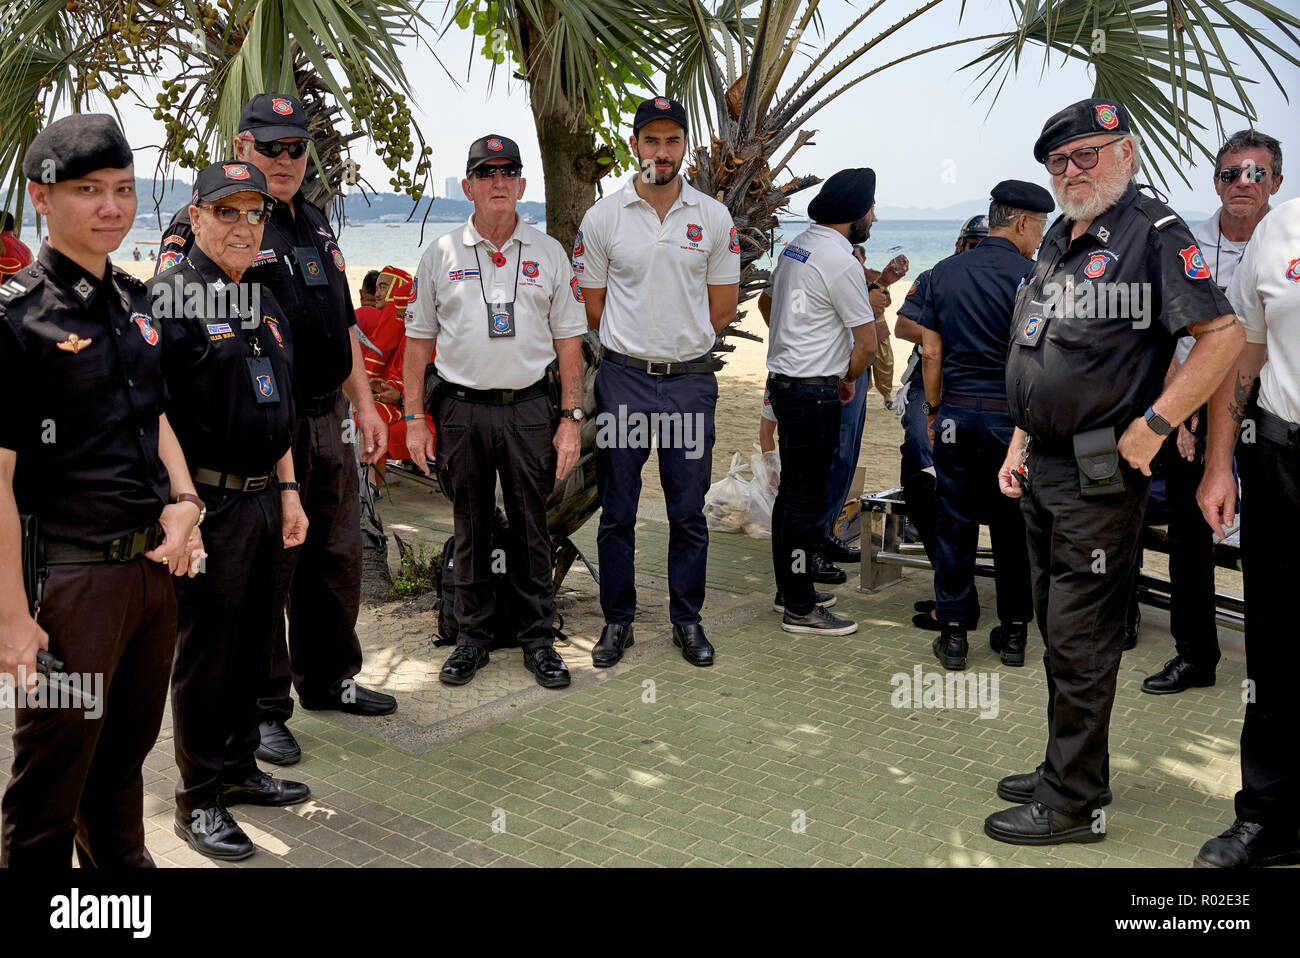 Thailand Tourist police volunteers gathering prior to operating as crowd control at a Historical event. Pattaya Thailand Southeast Asia Stock Photo